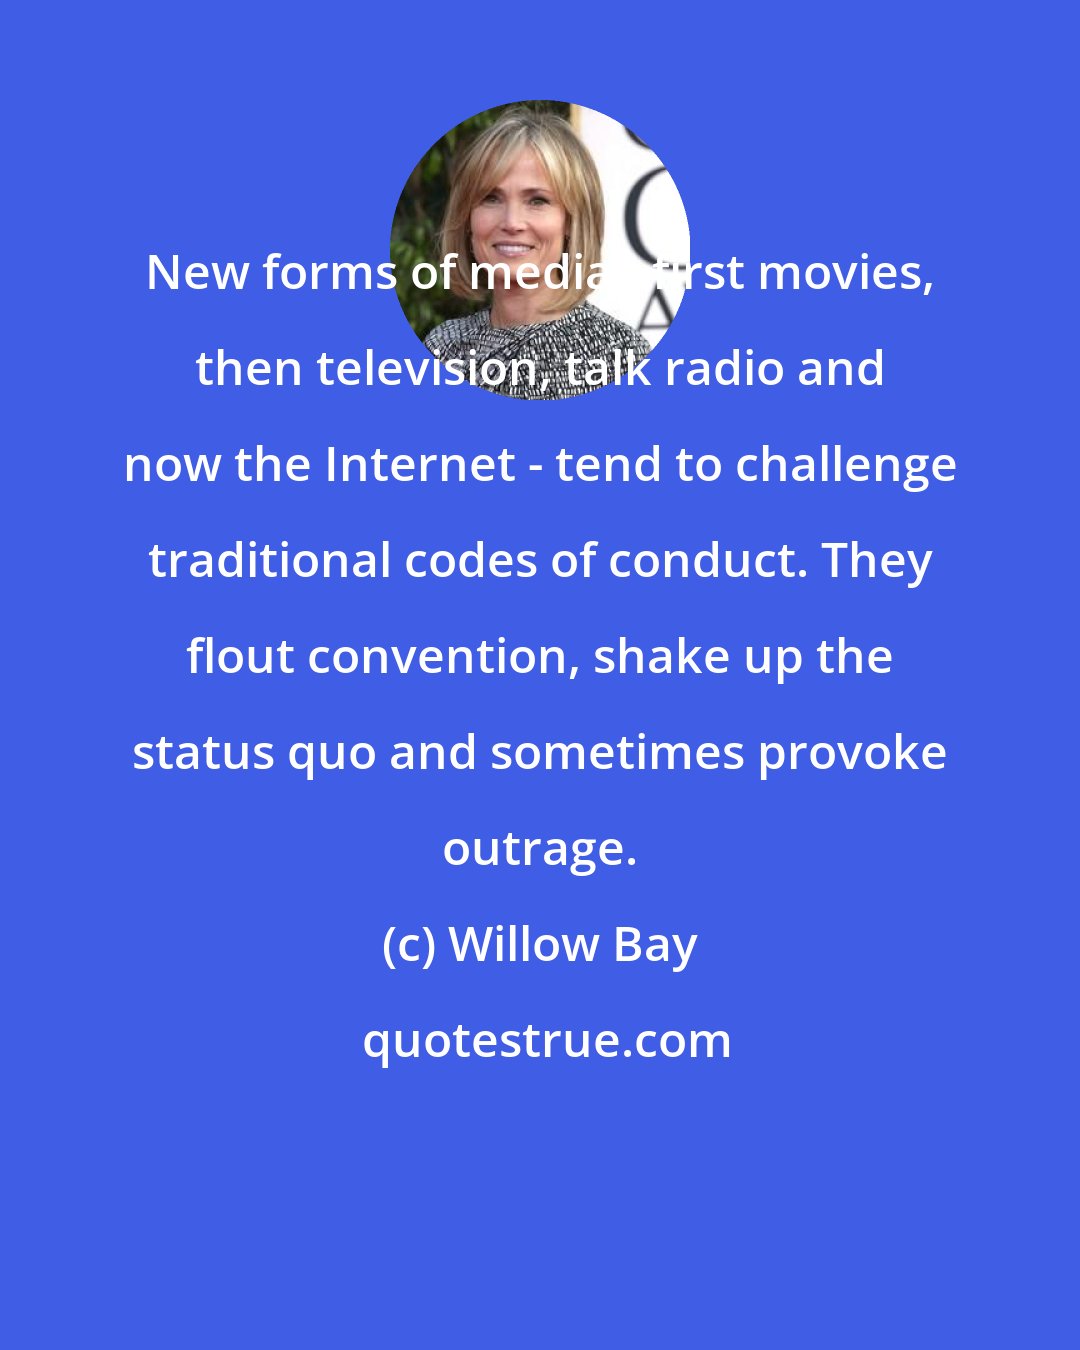 Willow Bay: New forms of media - first movies, then television, talk radio and now the Internet - tend to challenge traditional codes of conduct. They flout convention, shake up the status quo and sometimes provoke outrage.